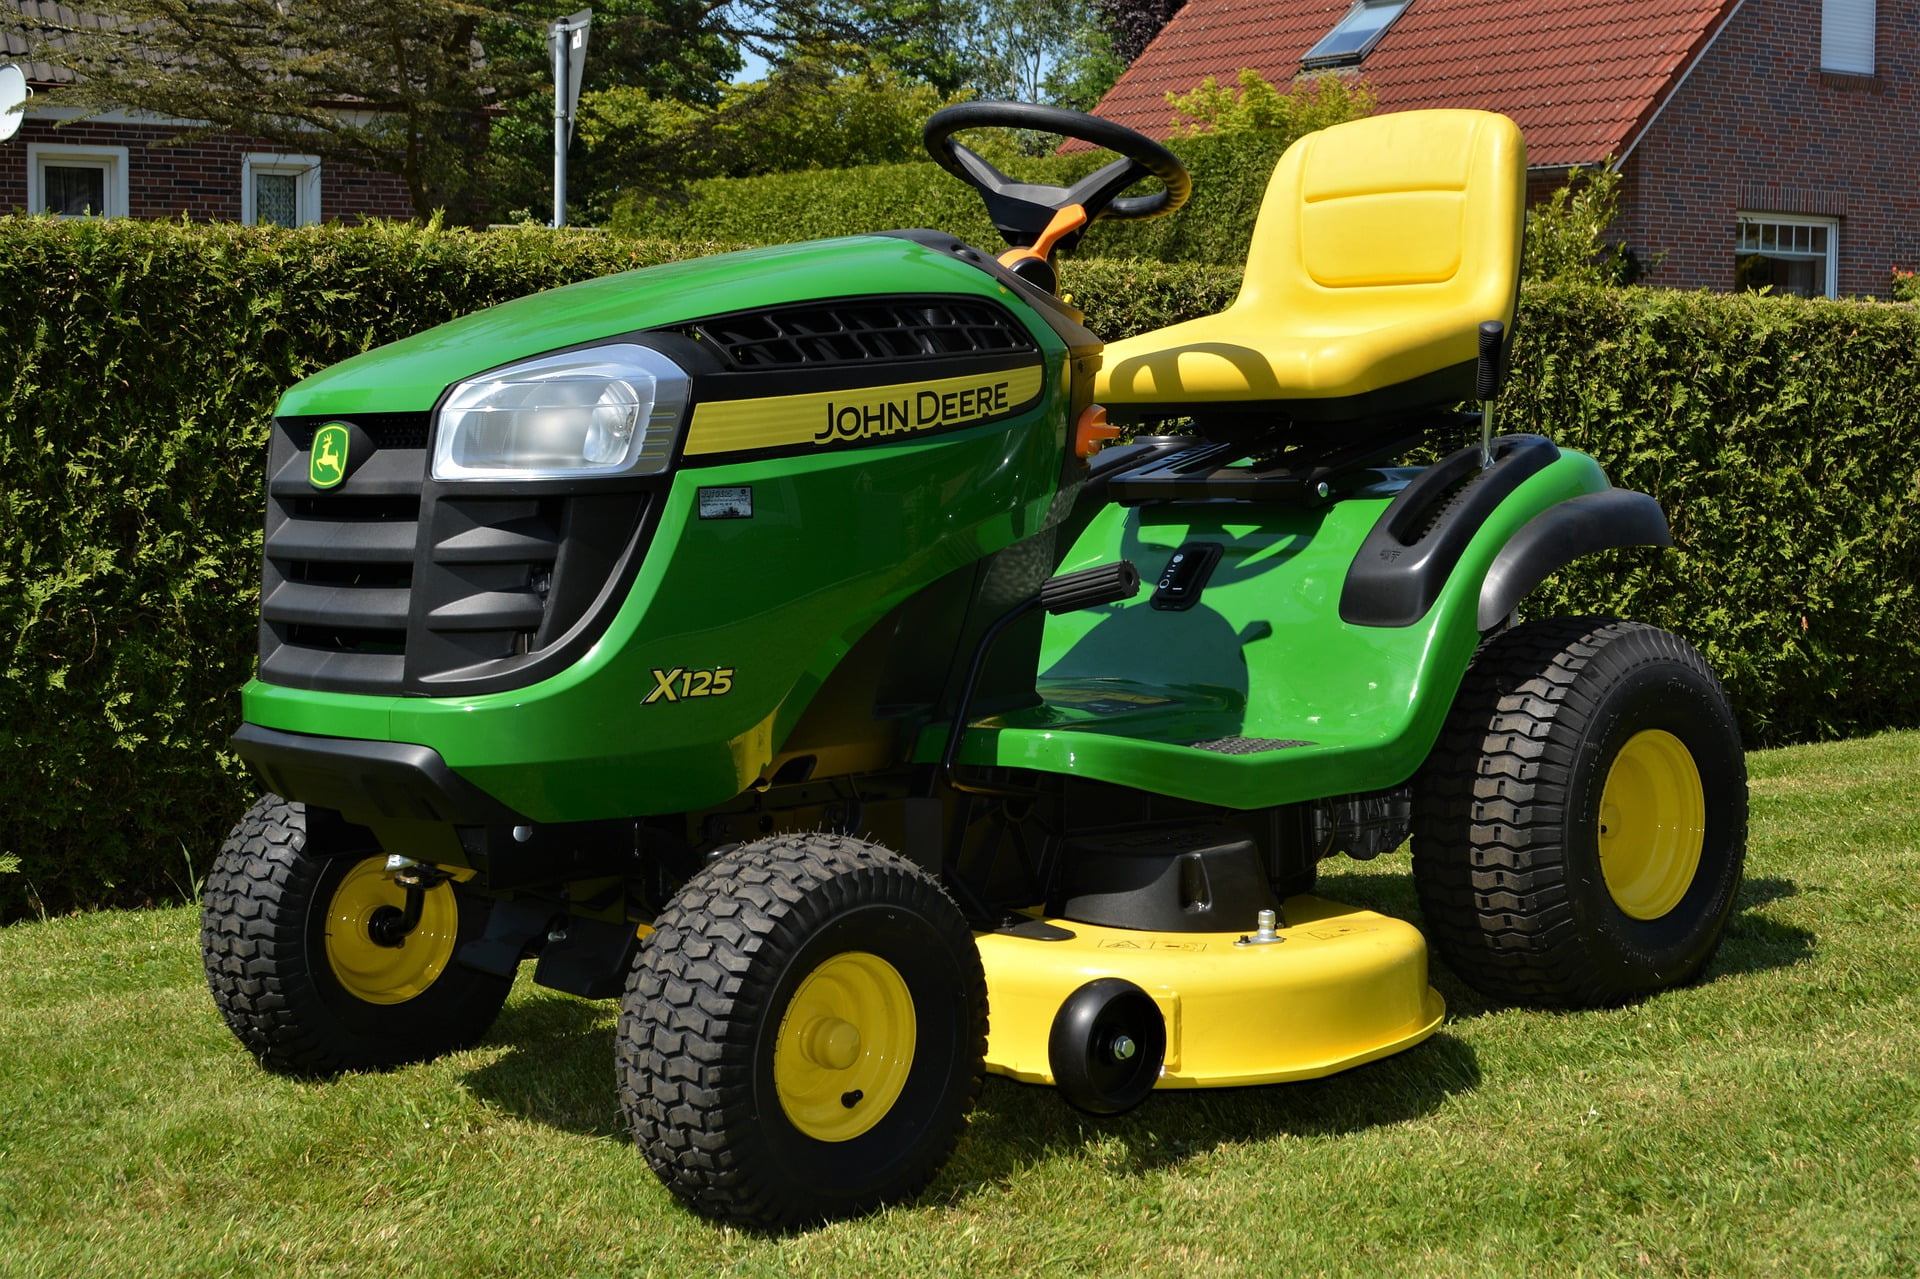 How to Start Riding Lawn Mower After Winter